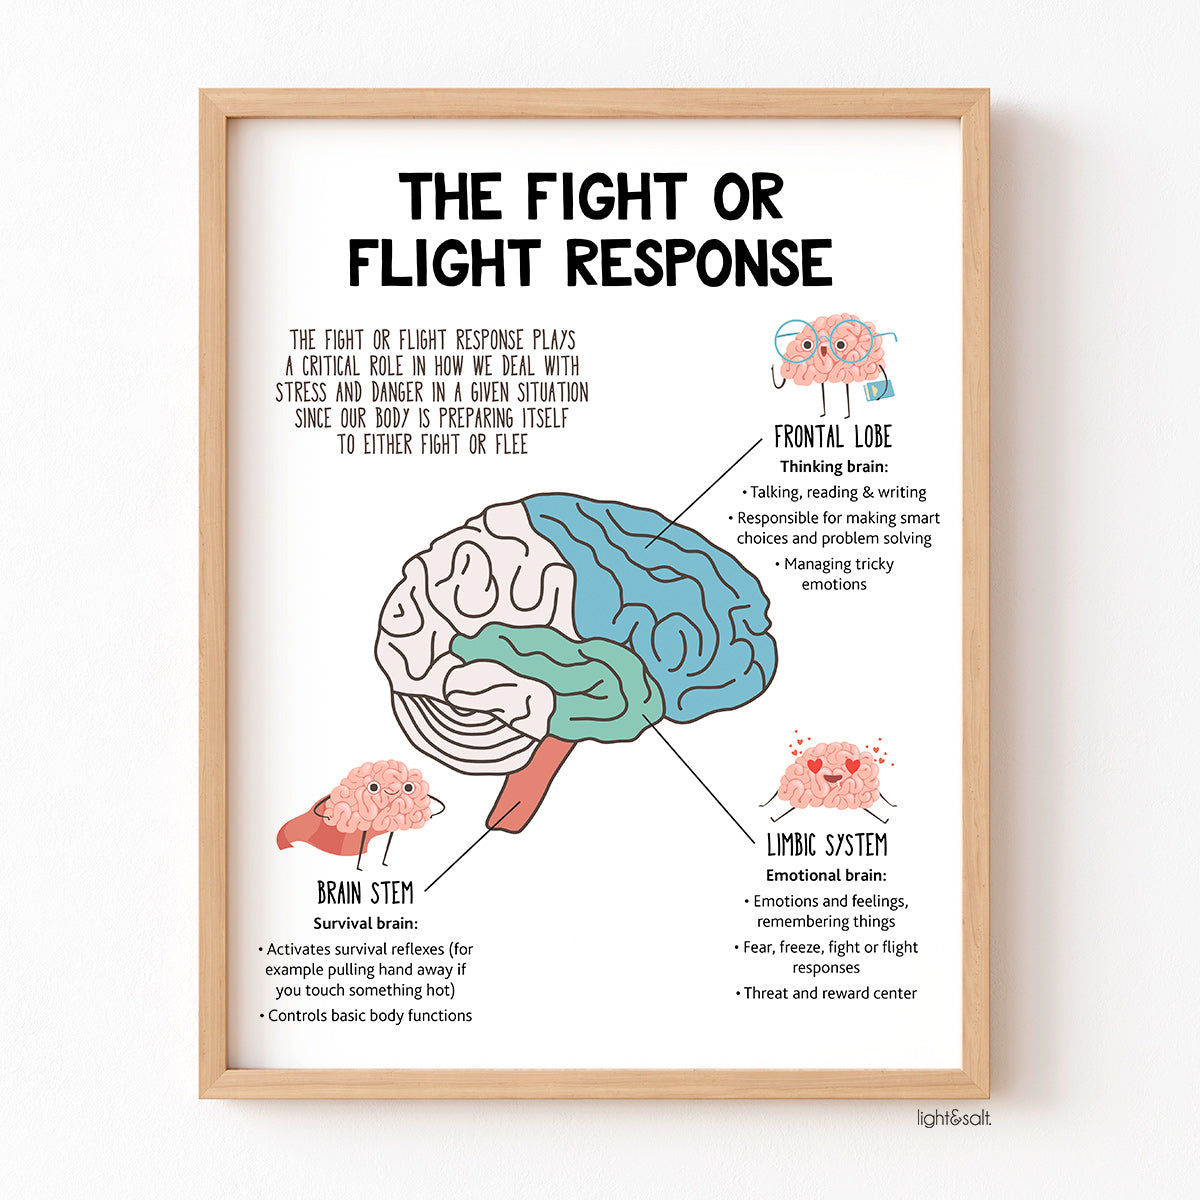 The Fight or Flight response poster